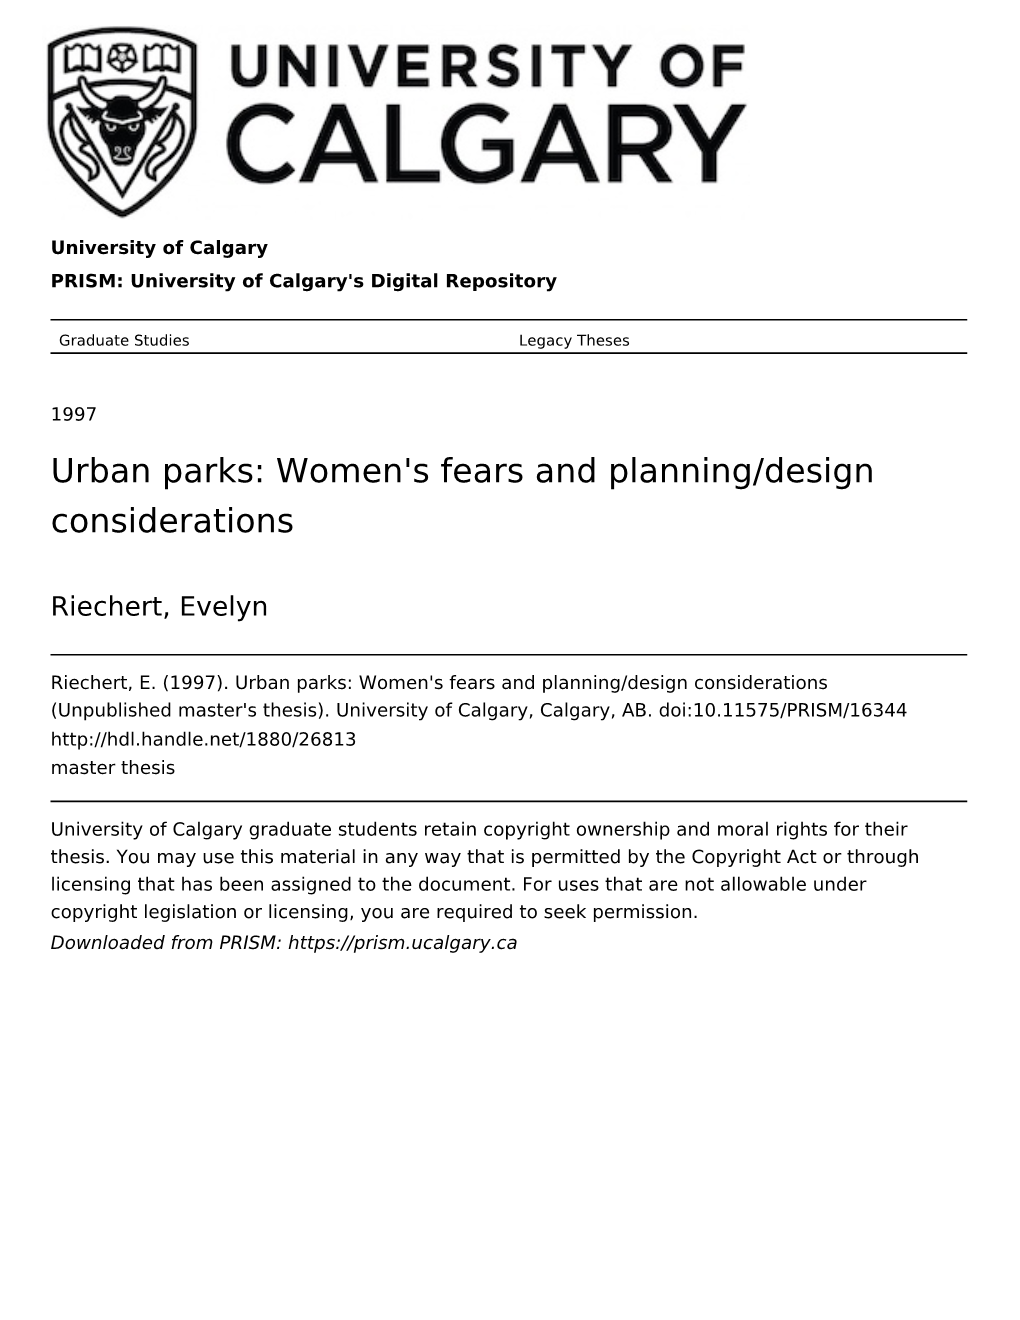 Urban Parks: Women's Fears and Planning/Design Considerations